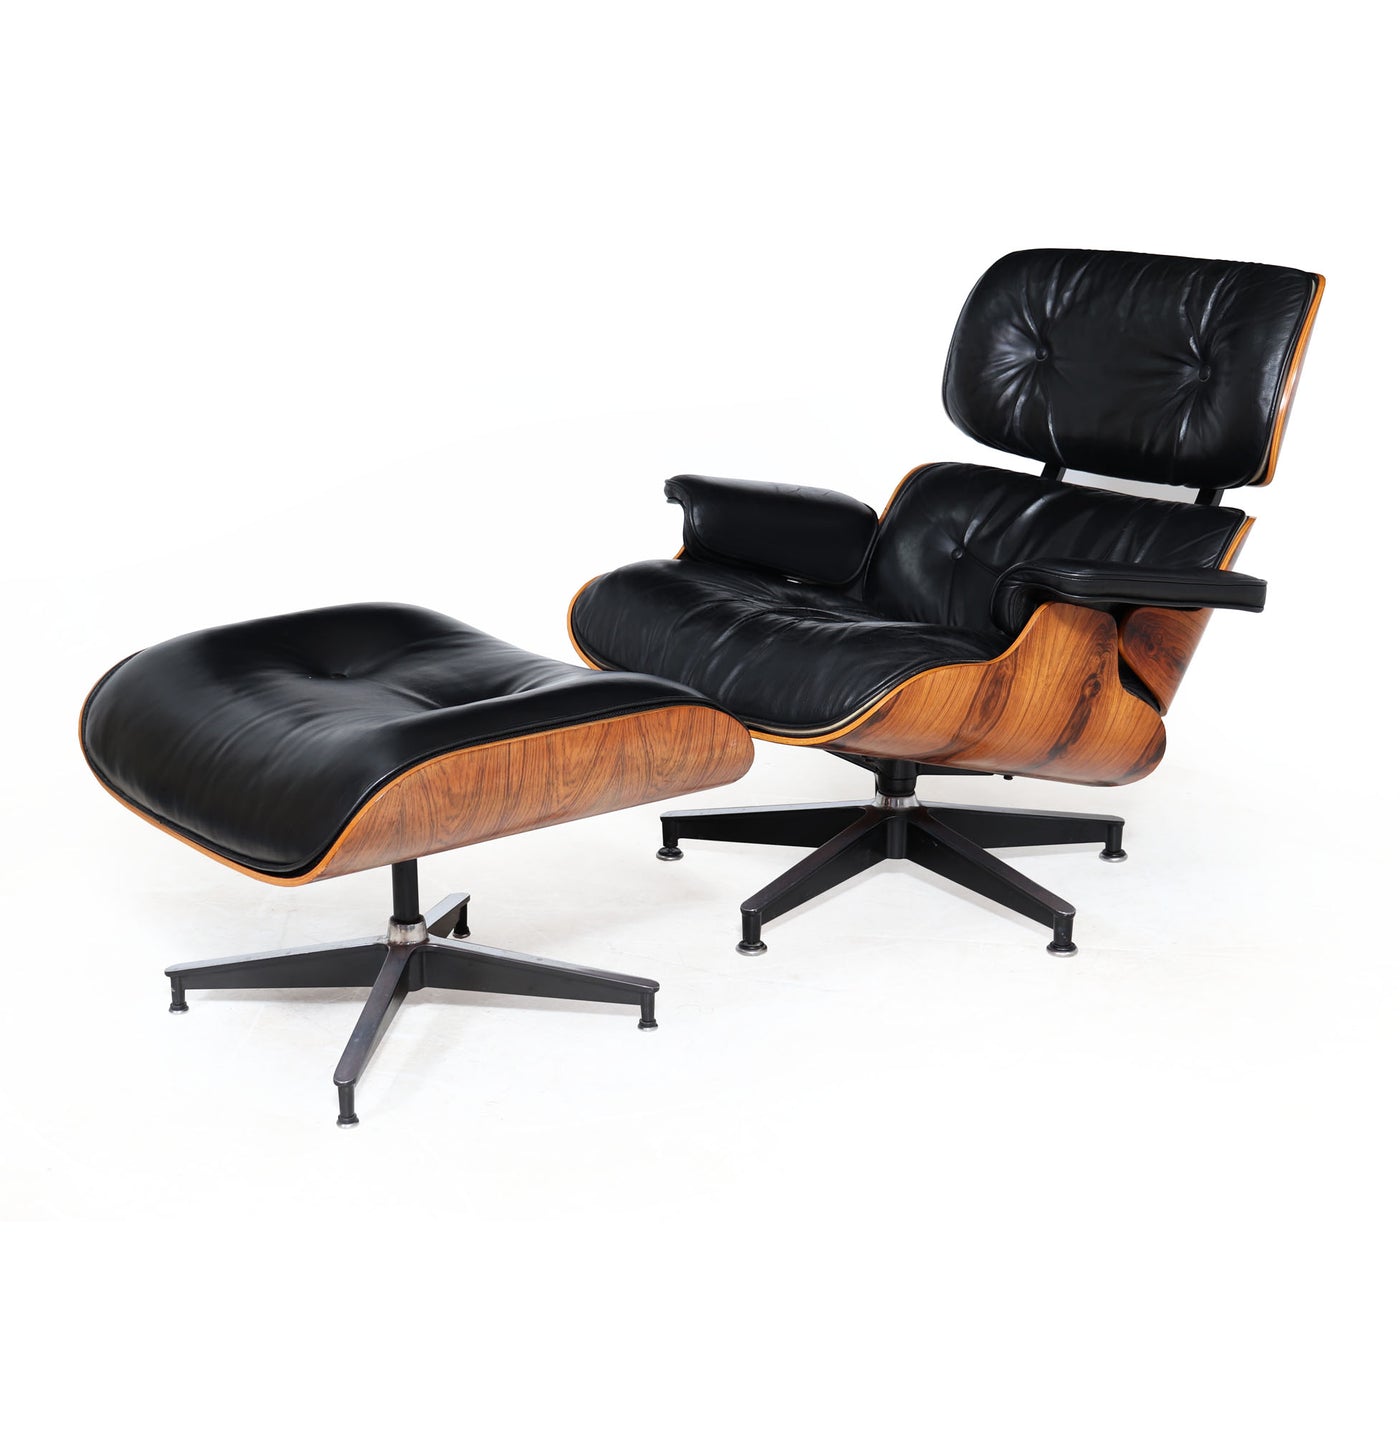 Eames Lounge Chair and Ottoman by Herman Miller 1970